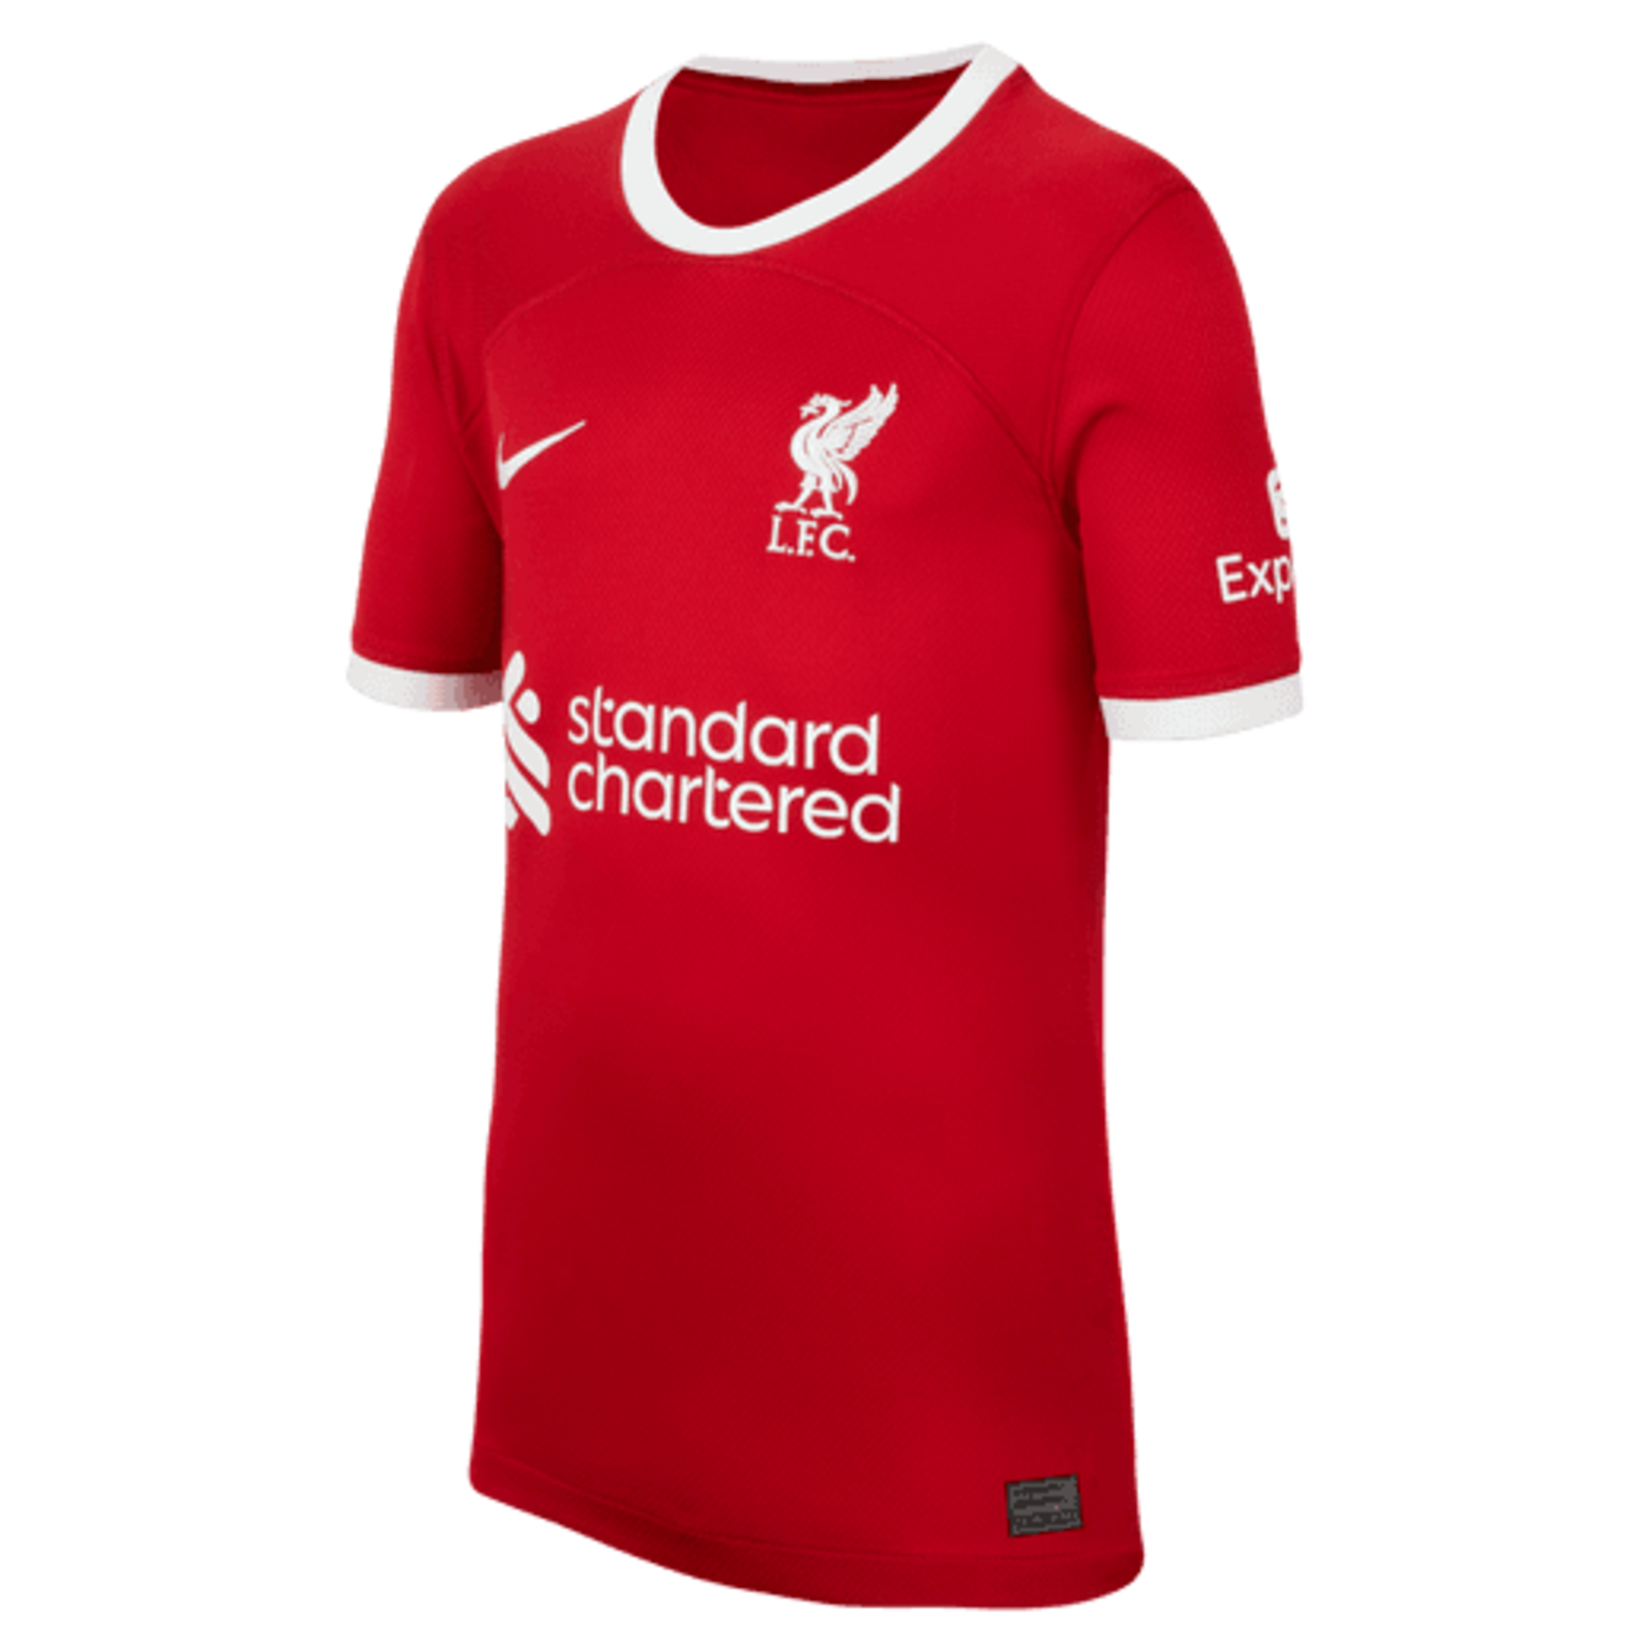 Nike Liverpool 23/24 Jersey - DX2766 688